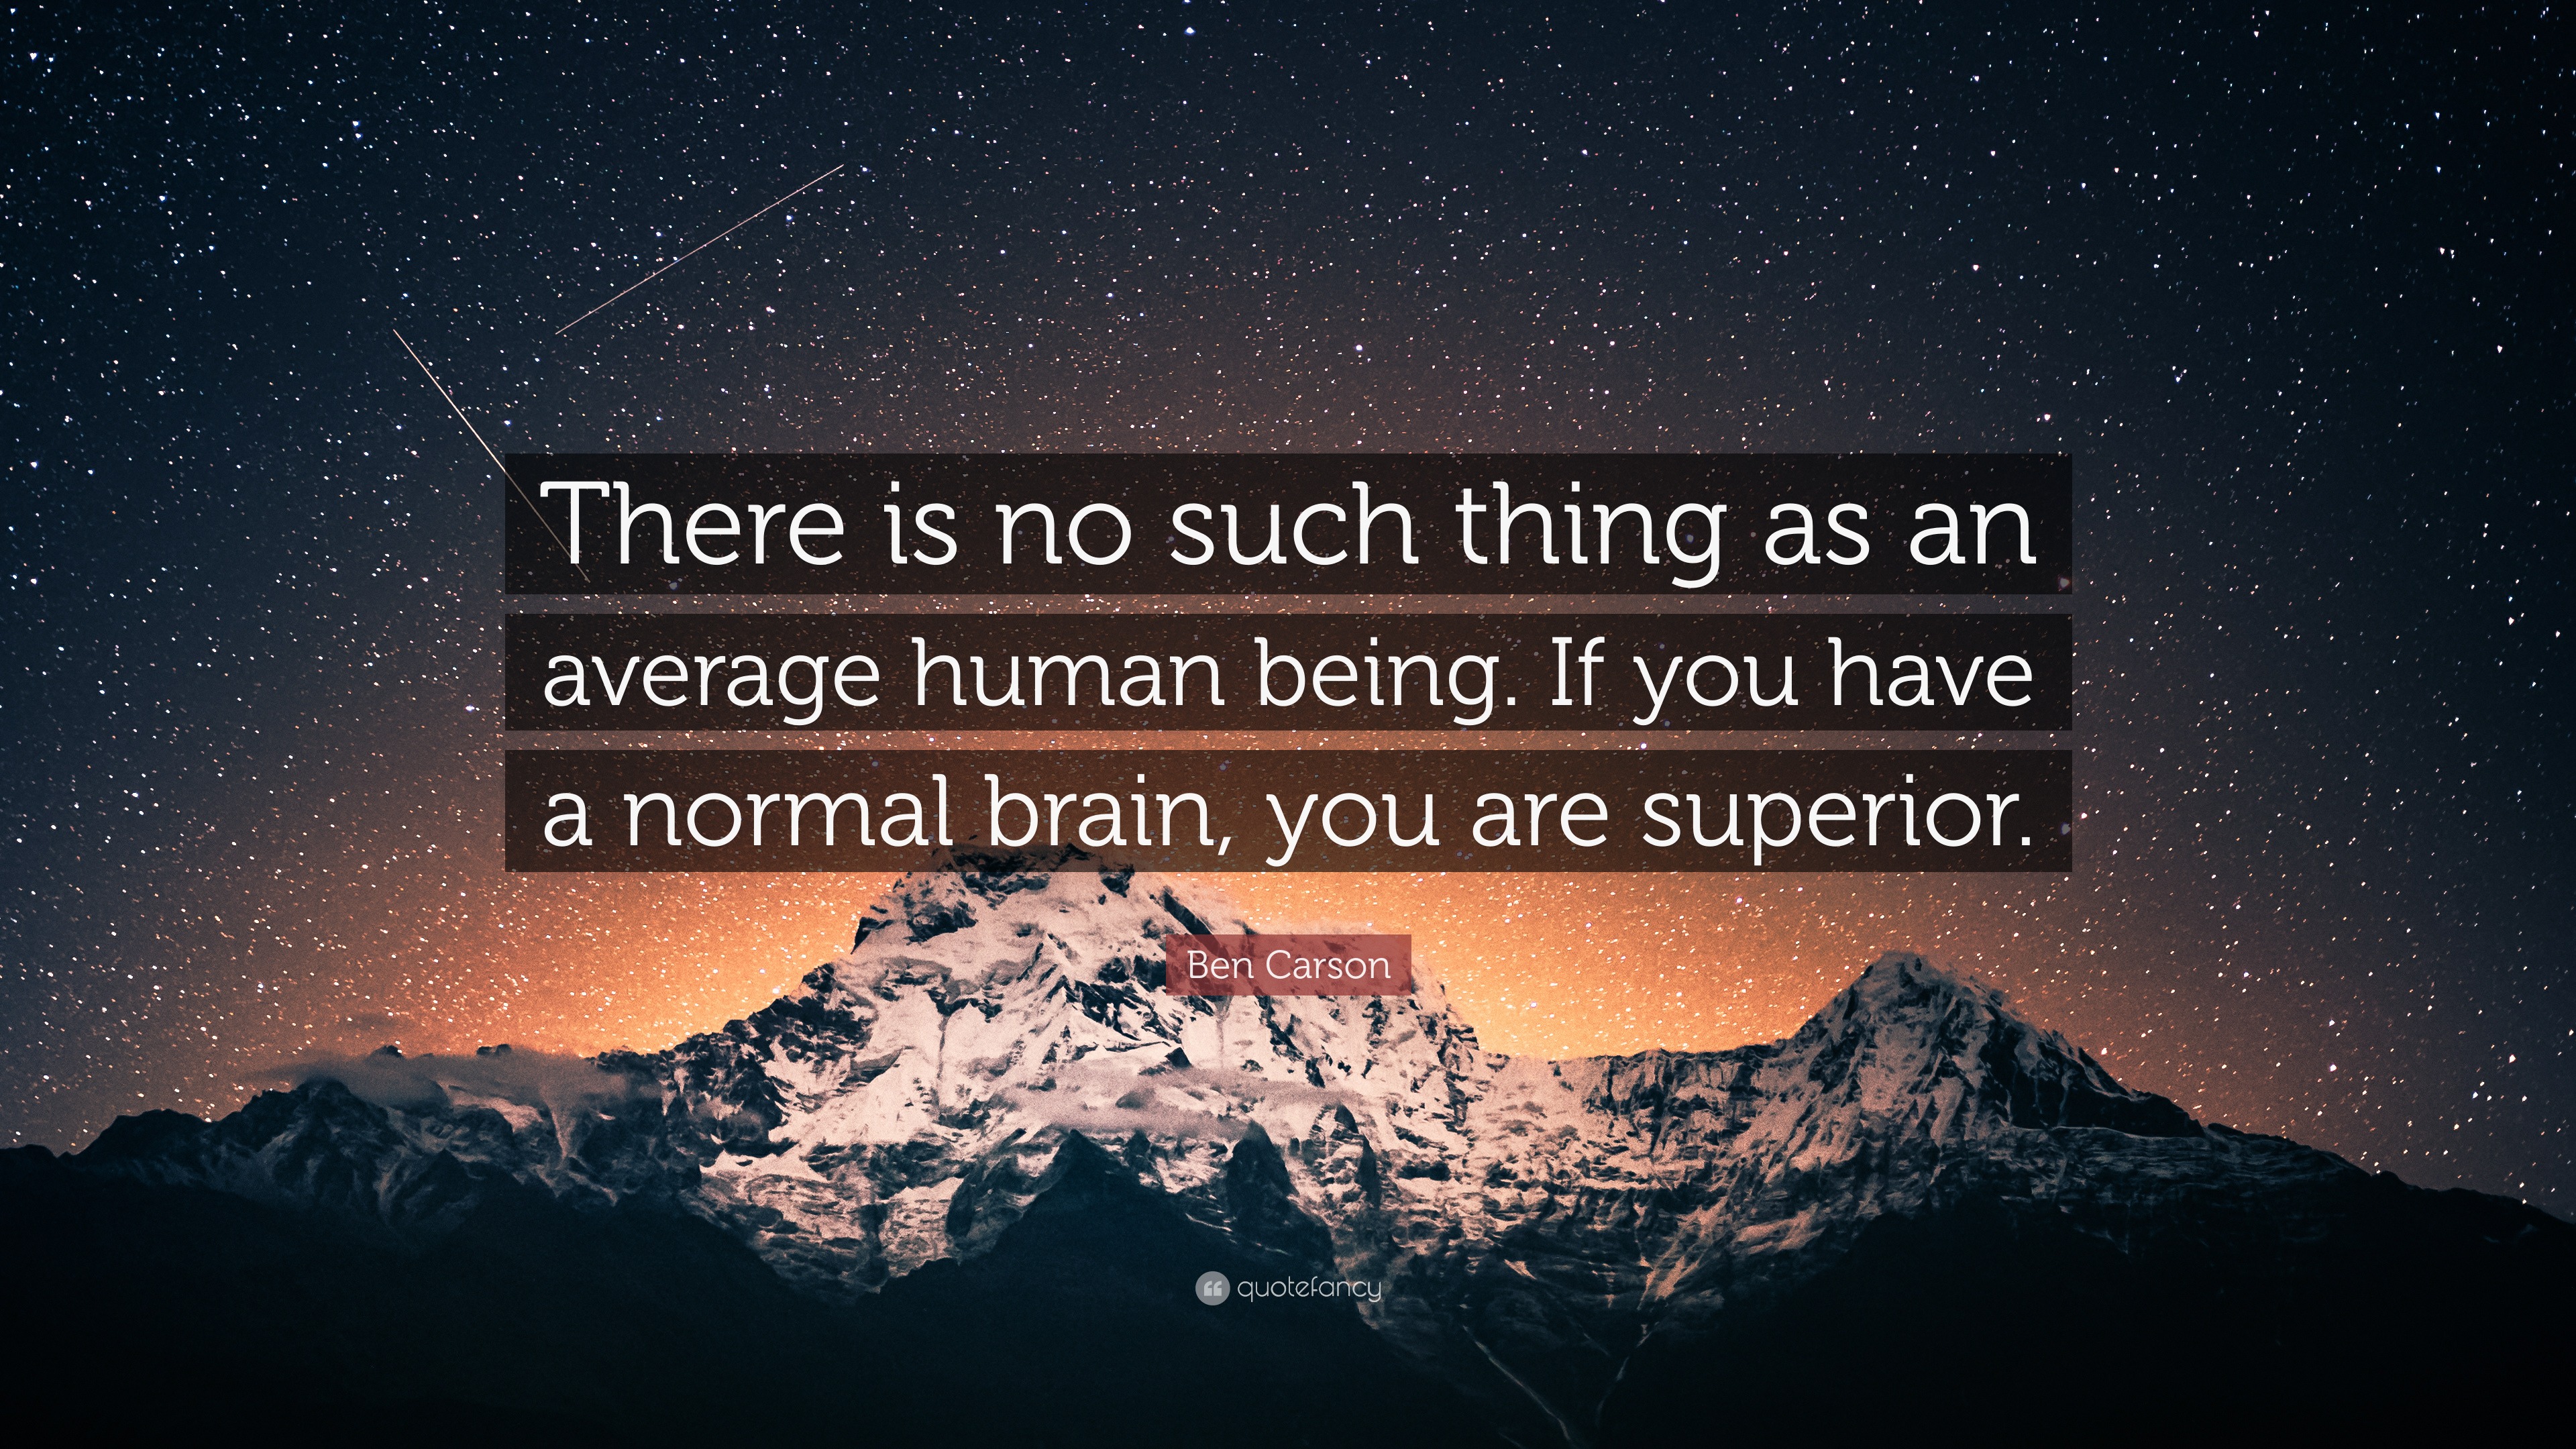 Ben Carson Quote: “There is no such thing as an average human being. If